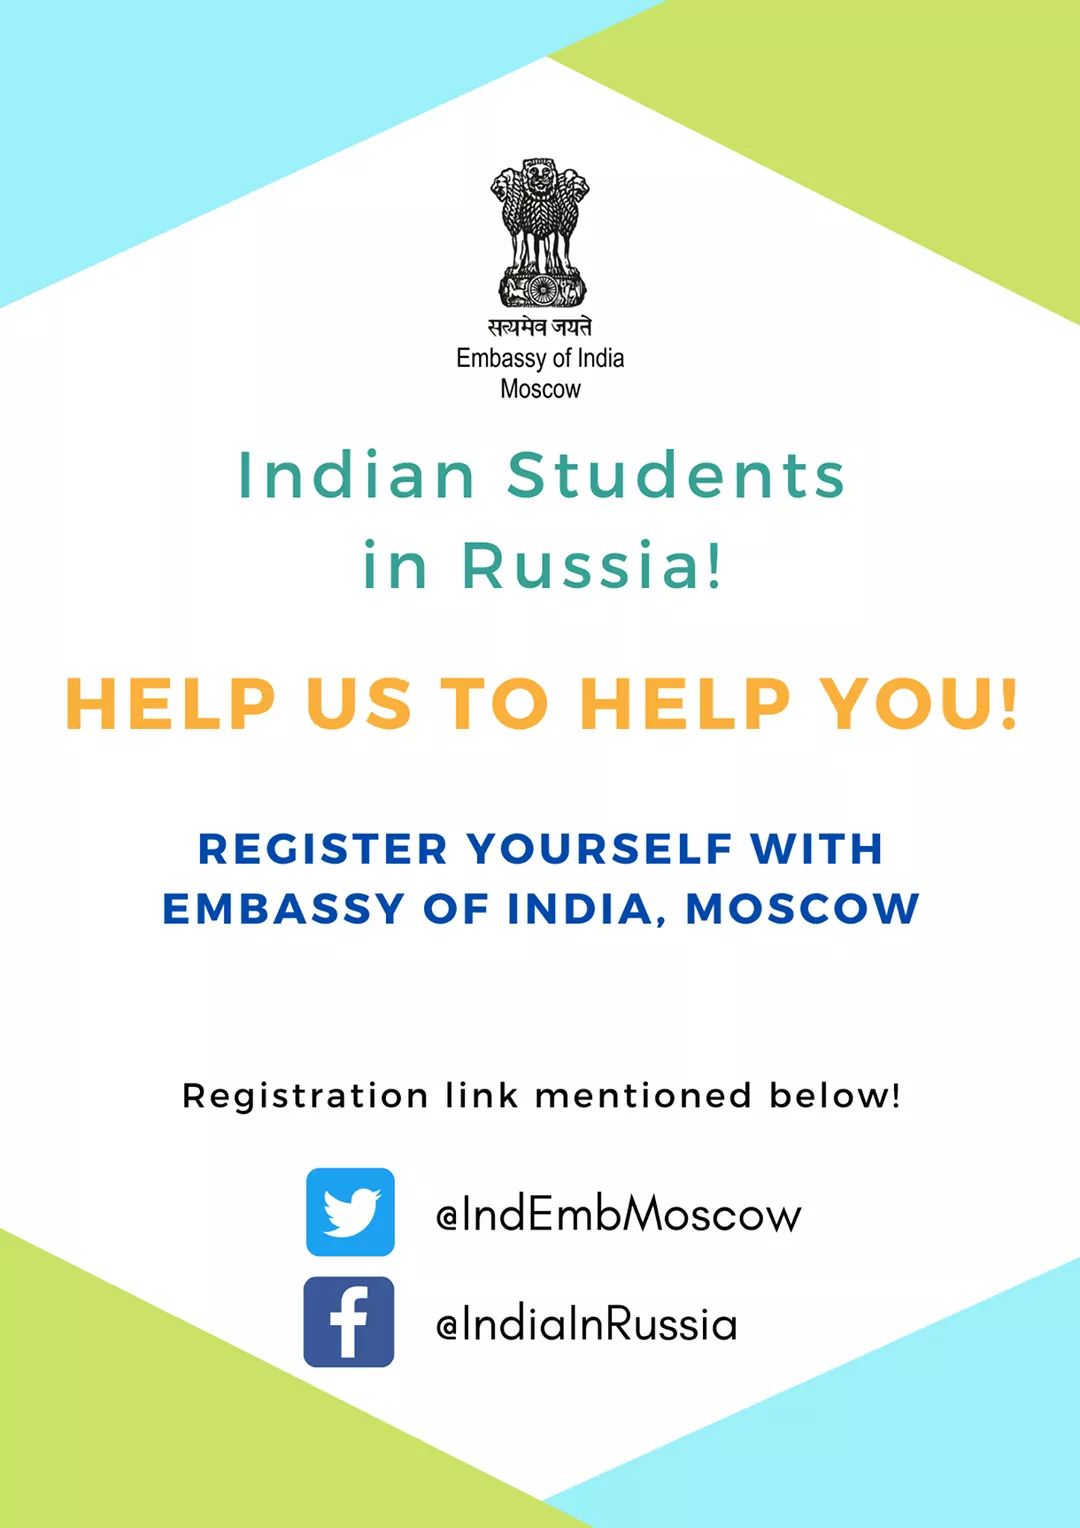 Indian Students in Russia — COVID-19 Initiative by Embassy of India